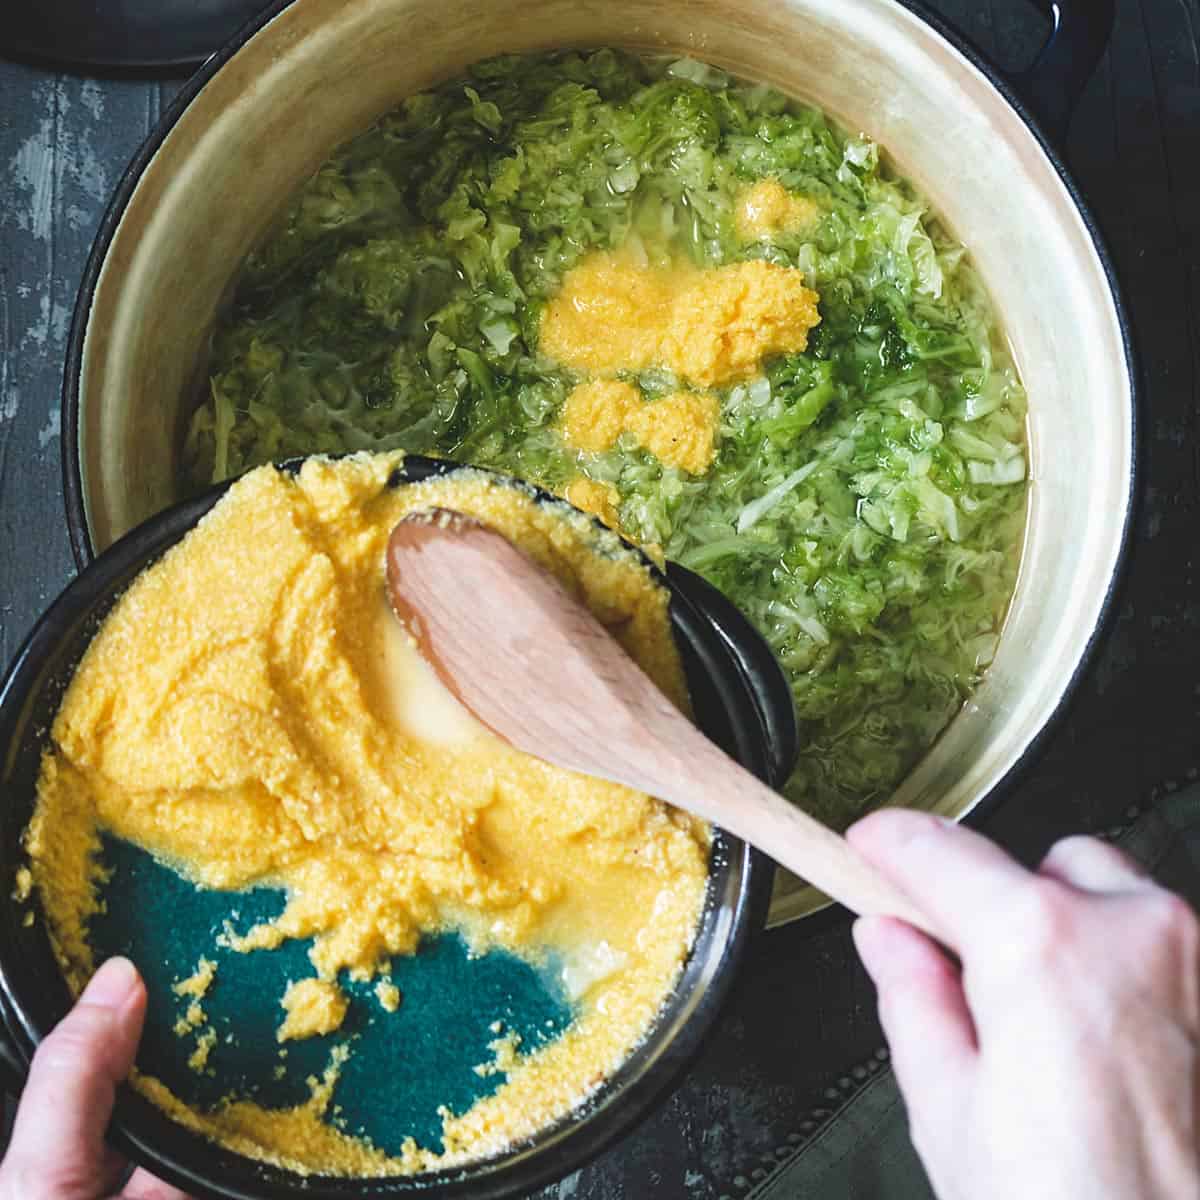 Adding cornmeal to cabbage in the pot.